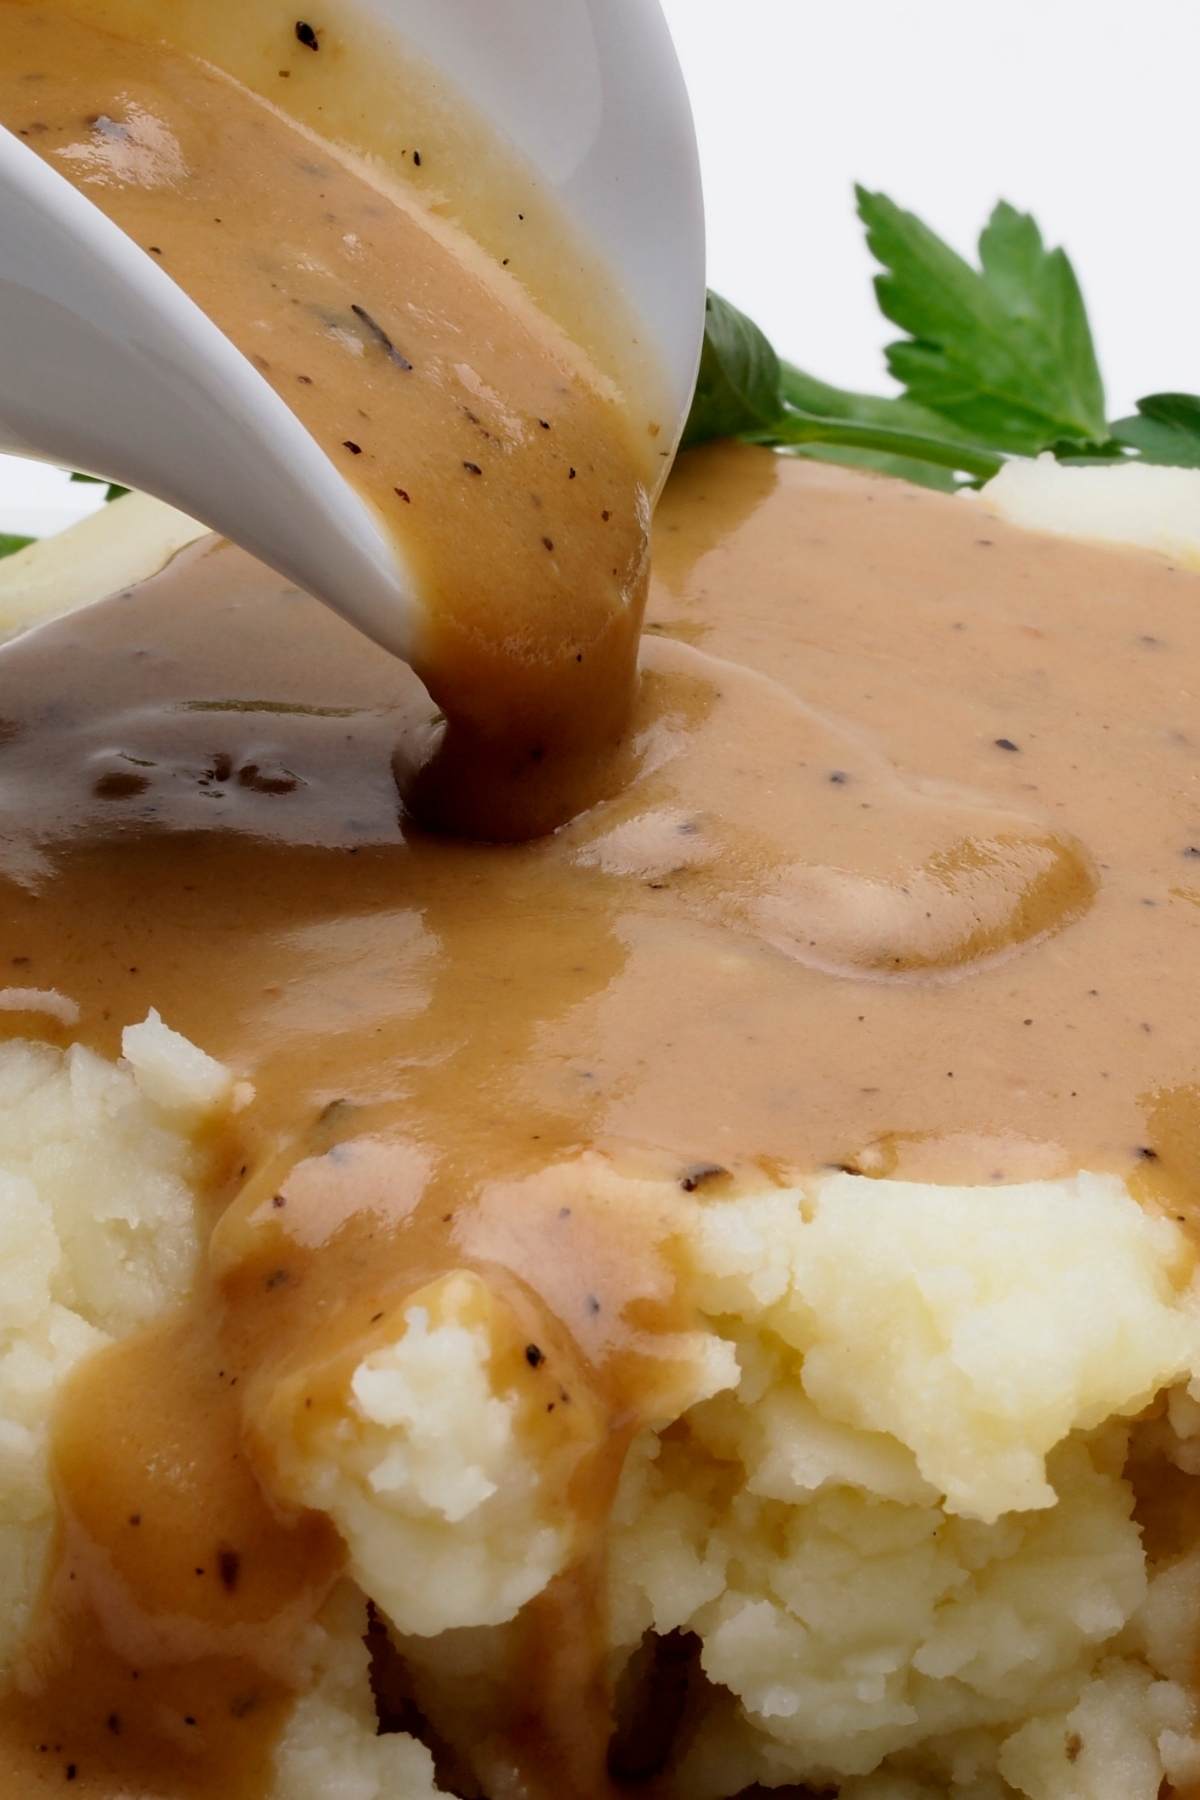 Use the drippings from roast pork to make this delicious Pork Gravy! It’s super easy, and you’ll love the rich and savory flavors.